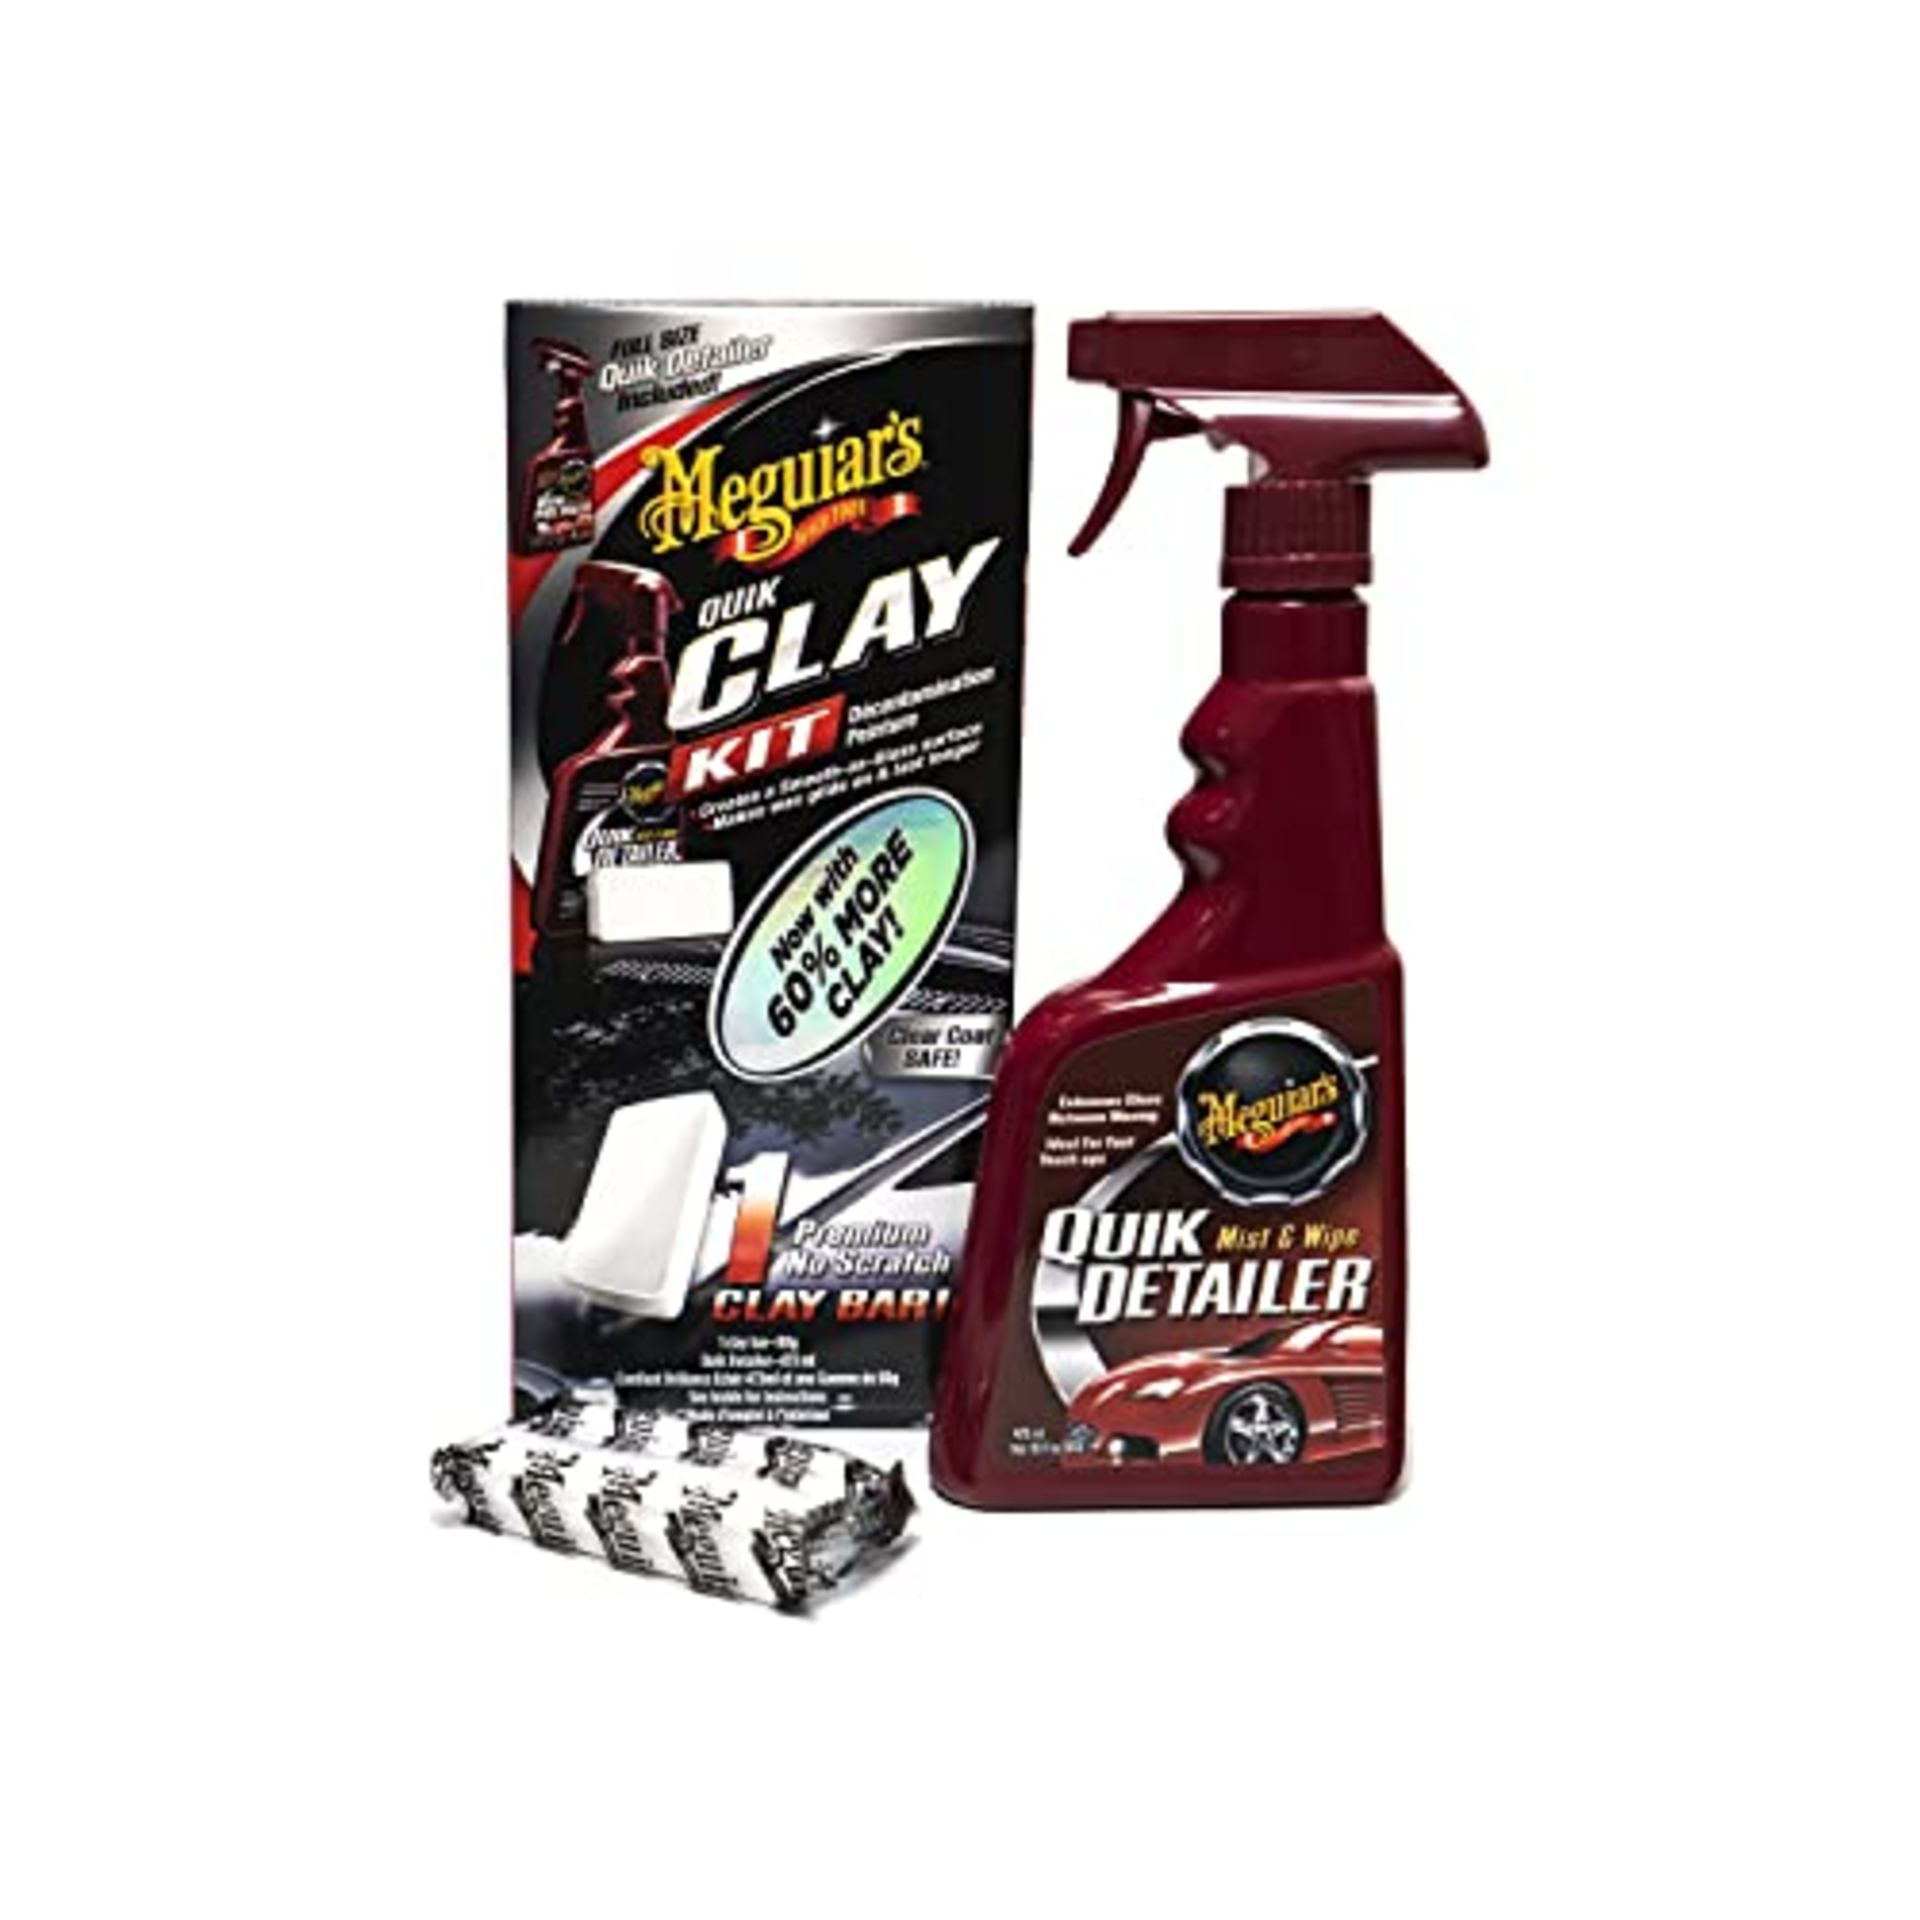 [INCOMPLETE] Meguiar's G1116EU Quik Clay Bar Starter Kit with 80g of clay and 473ml De